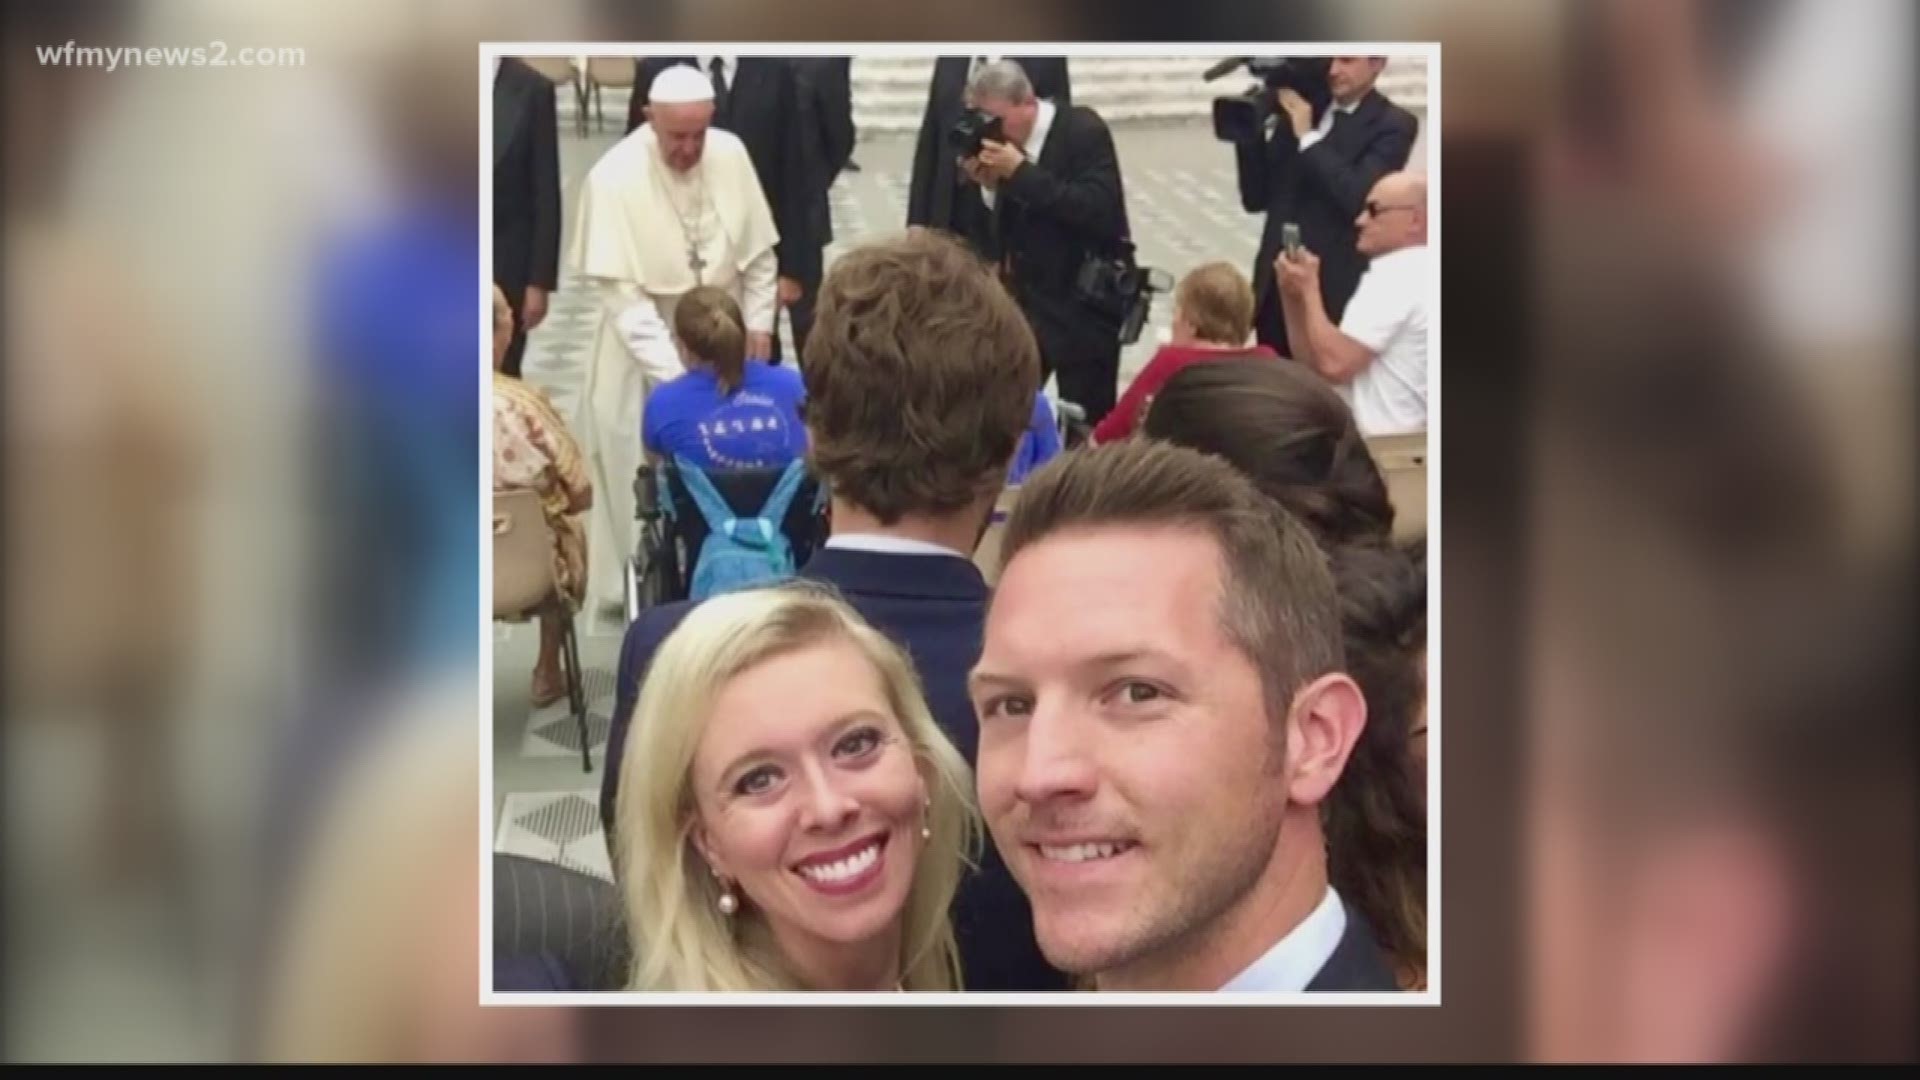 Pope Francis Blesses WFMY's Meghann Mollerus and Husband